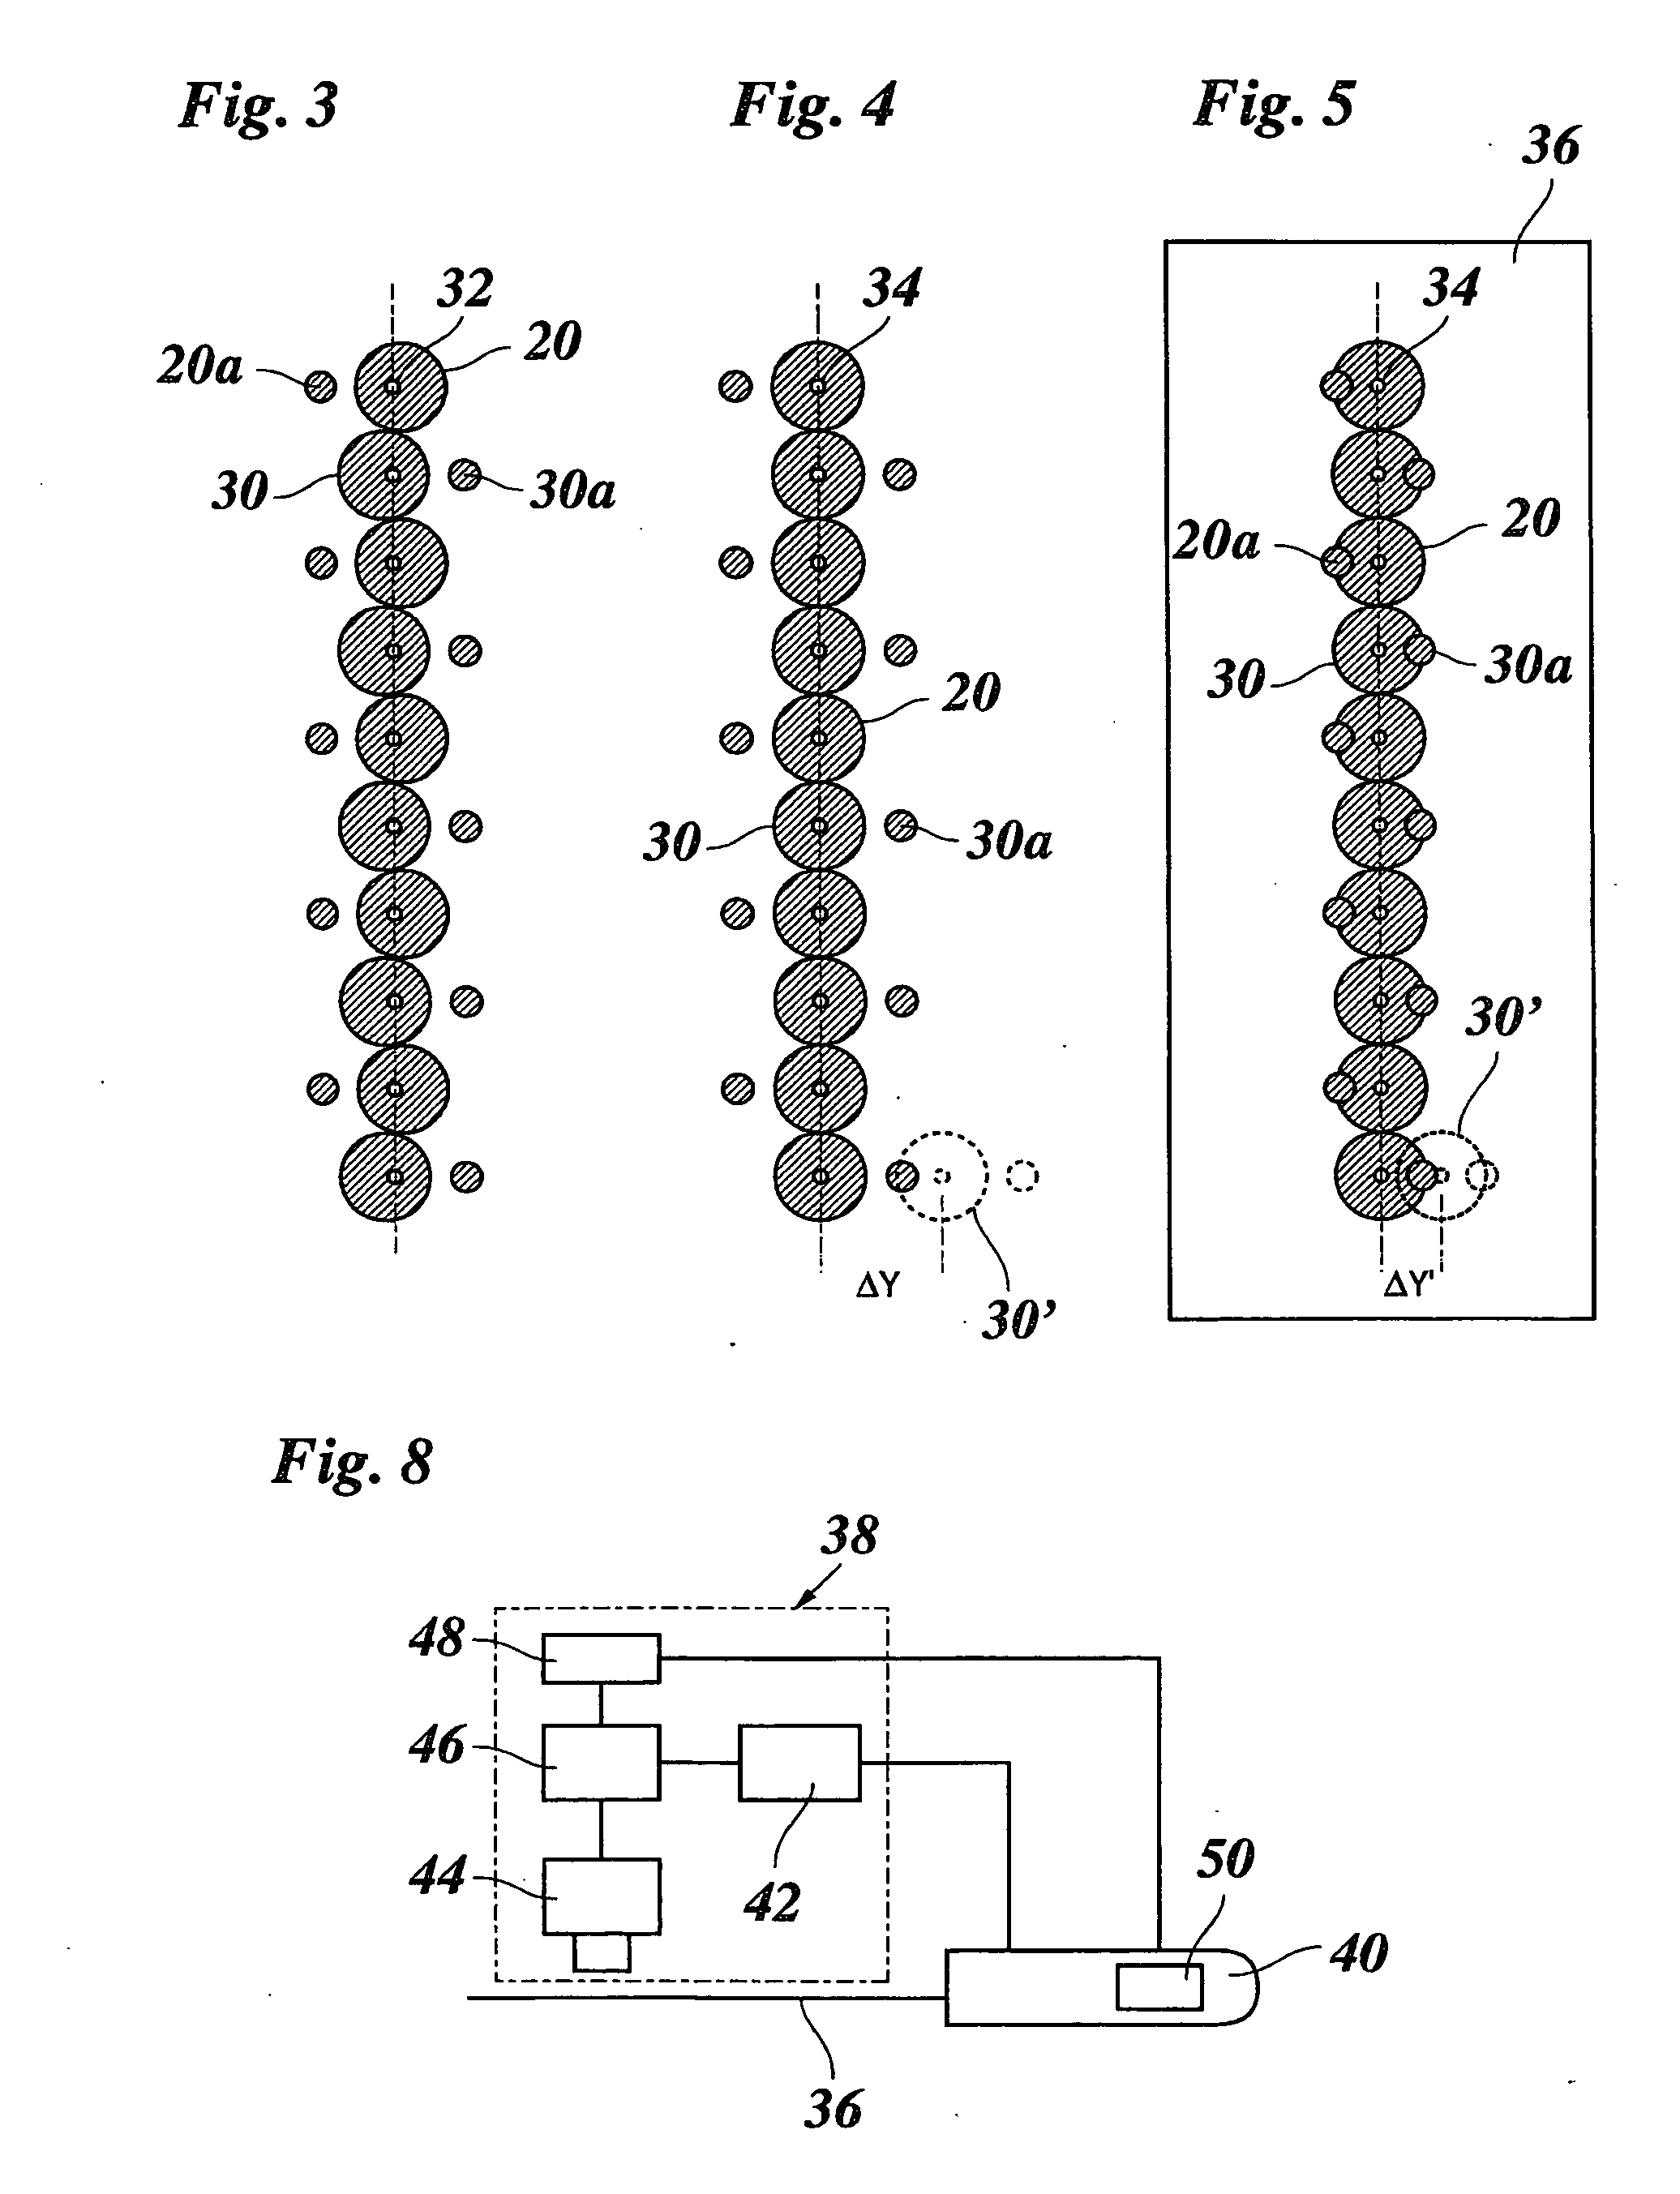 Method for aligning droplets expelled from an ink jet printer